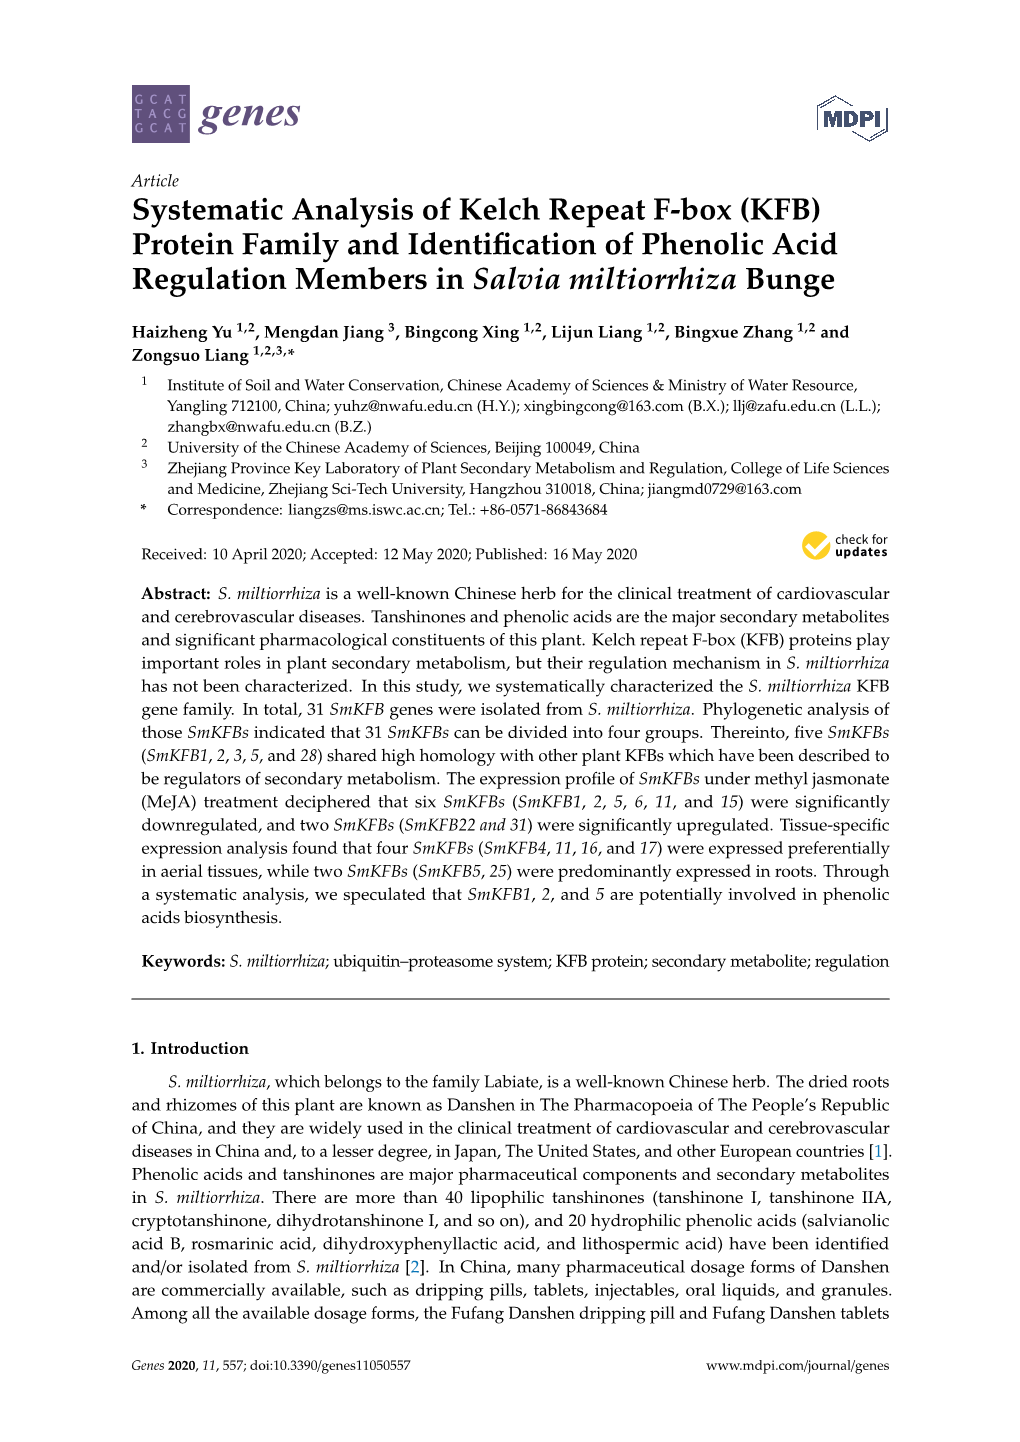 Systematic Analysis of Kelch Repeat F-Box (KFB) Protein Family and Identiﬁcation of Phenolic Acid Regulation Members in Salvia Miltiorrhiza Bunge